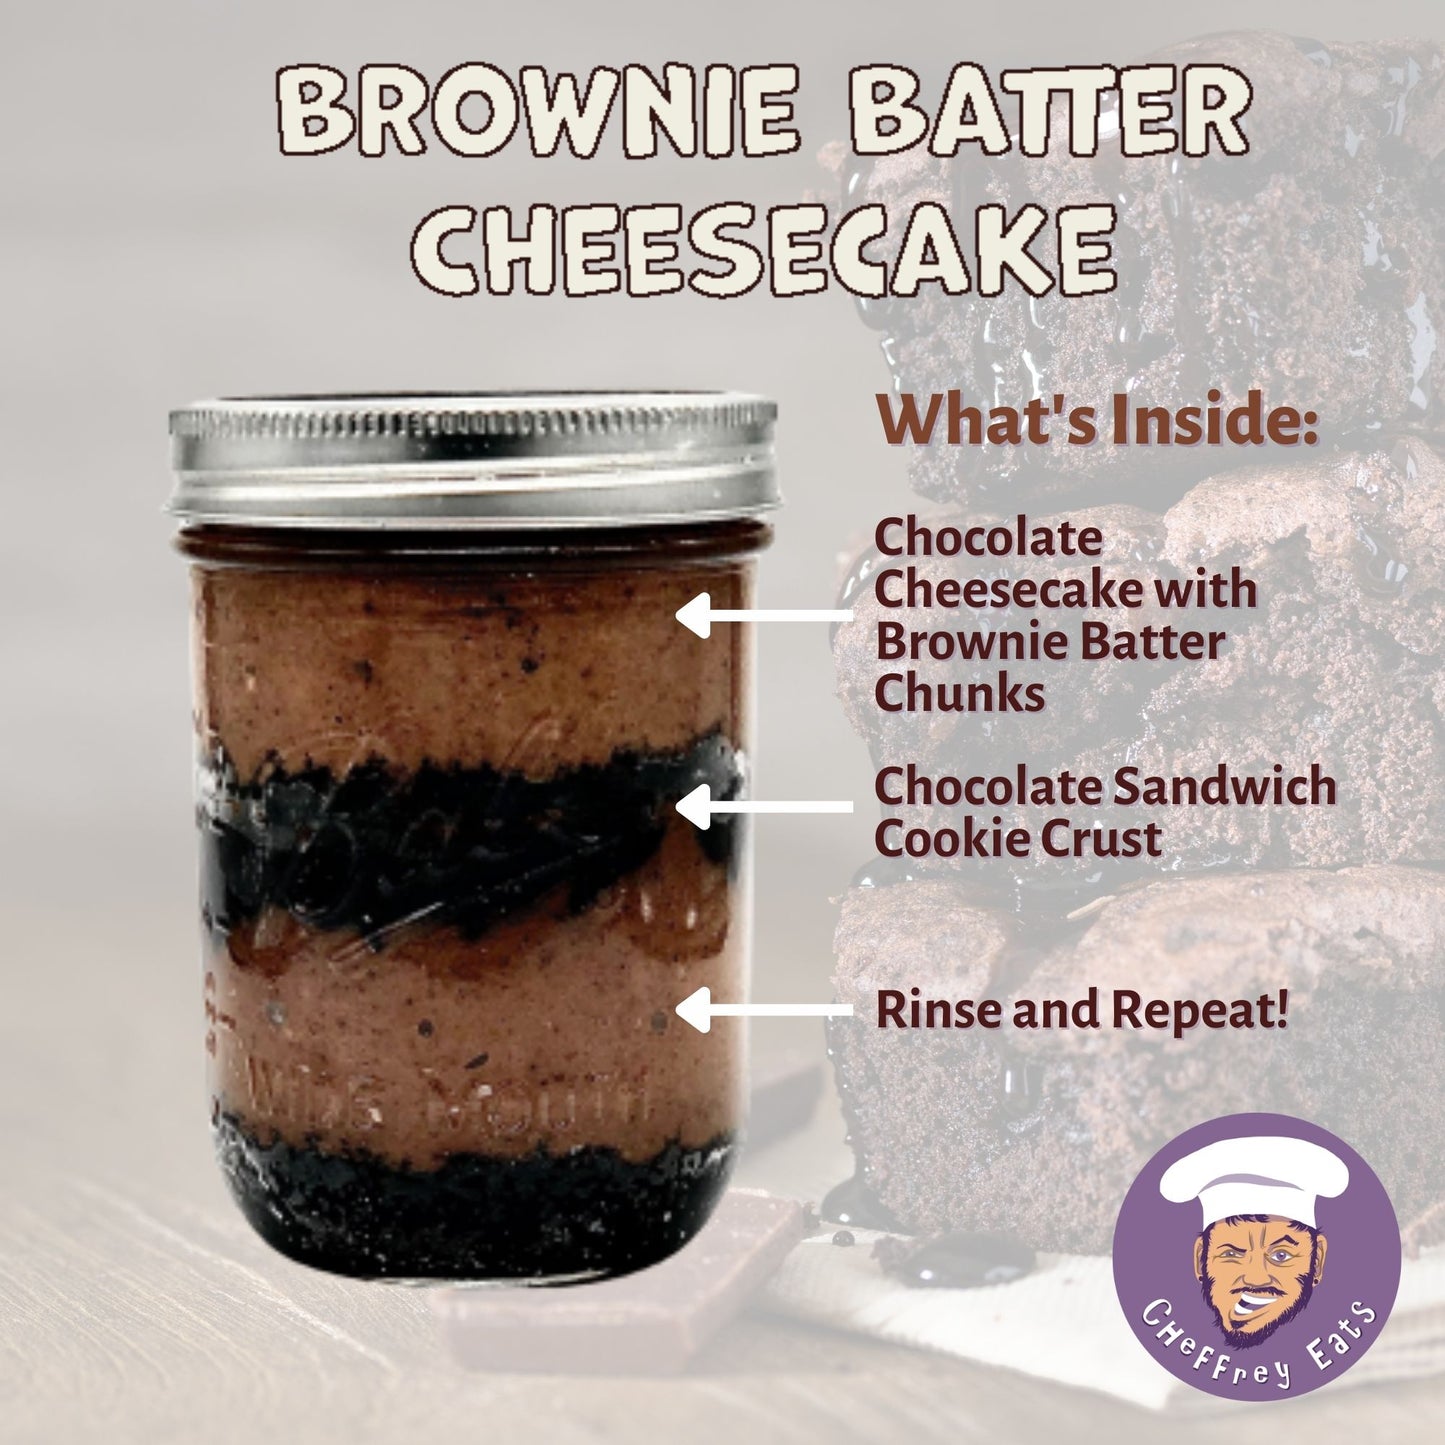 March 2023 Cheesecake Jar 4-Pack